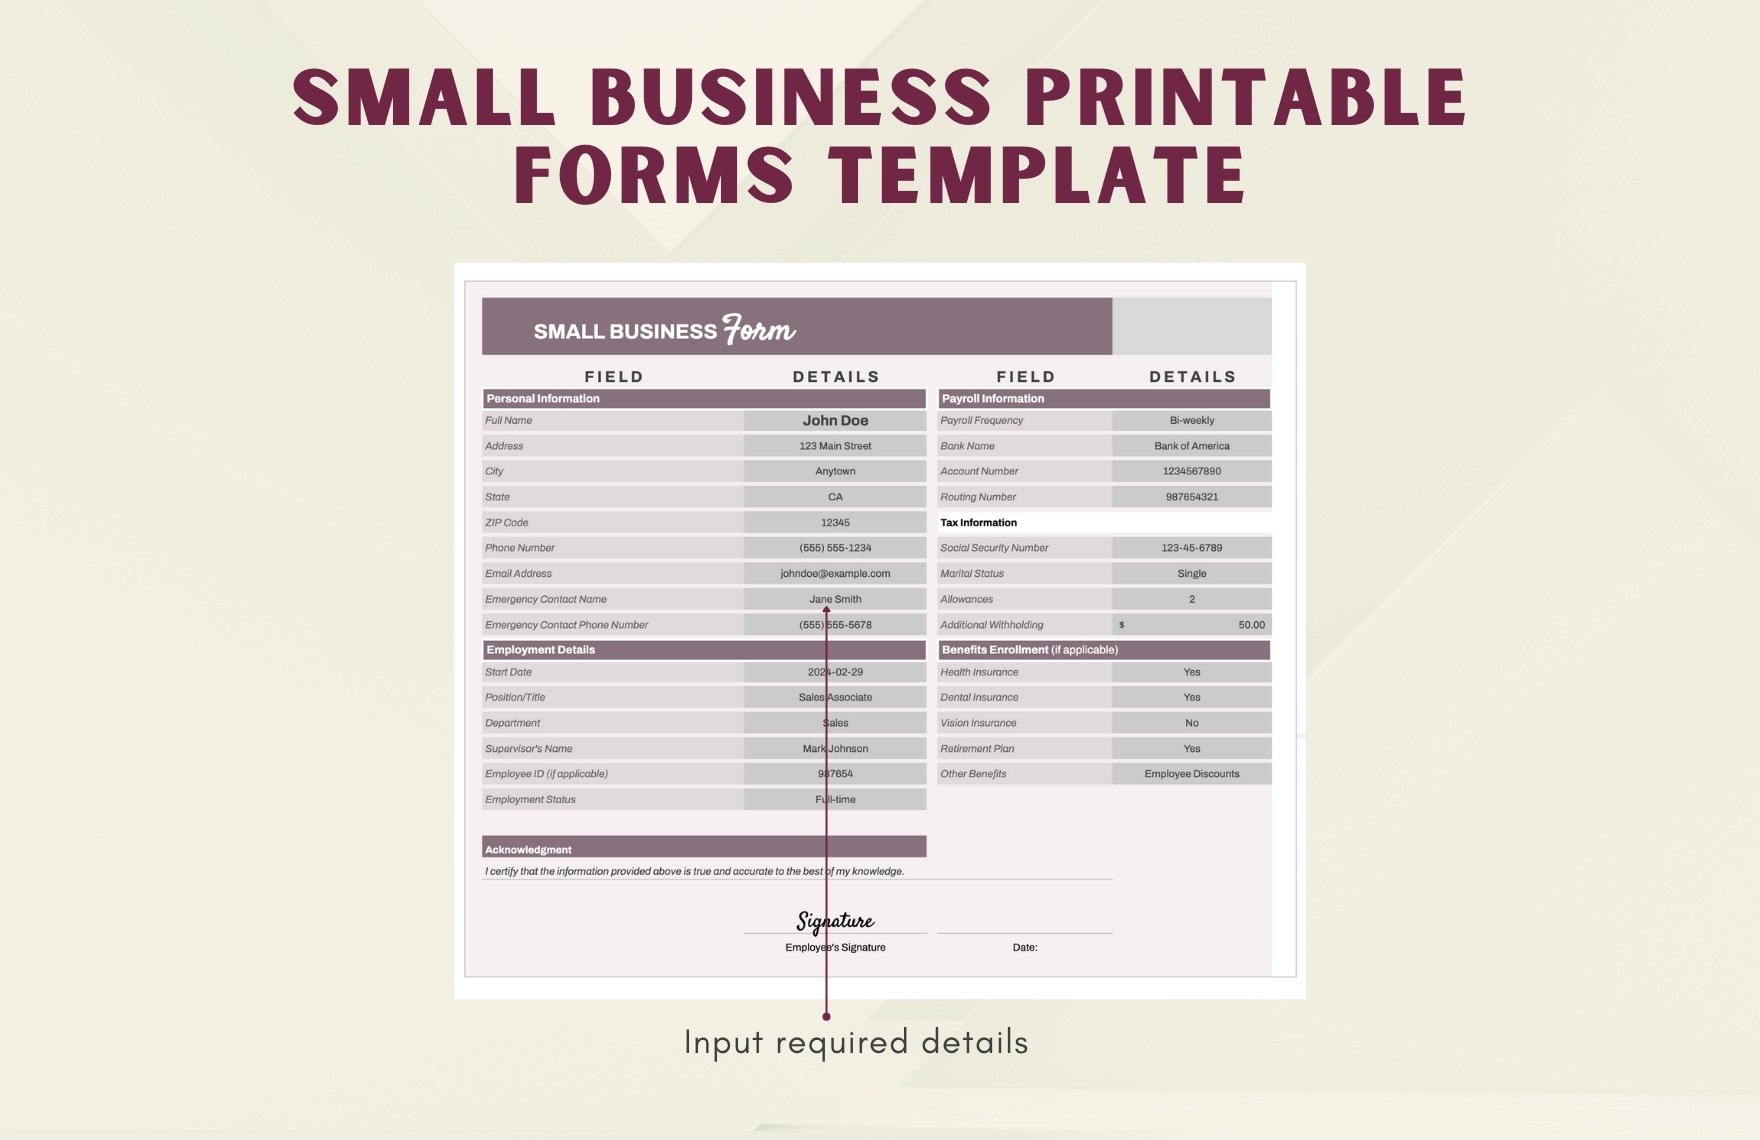 Small Business Printable Forms Template